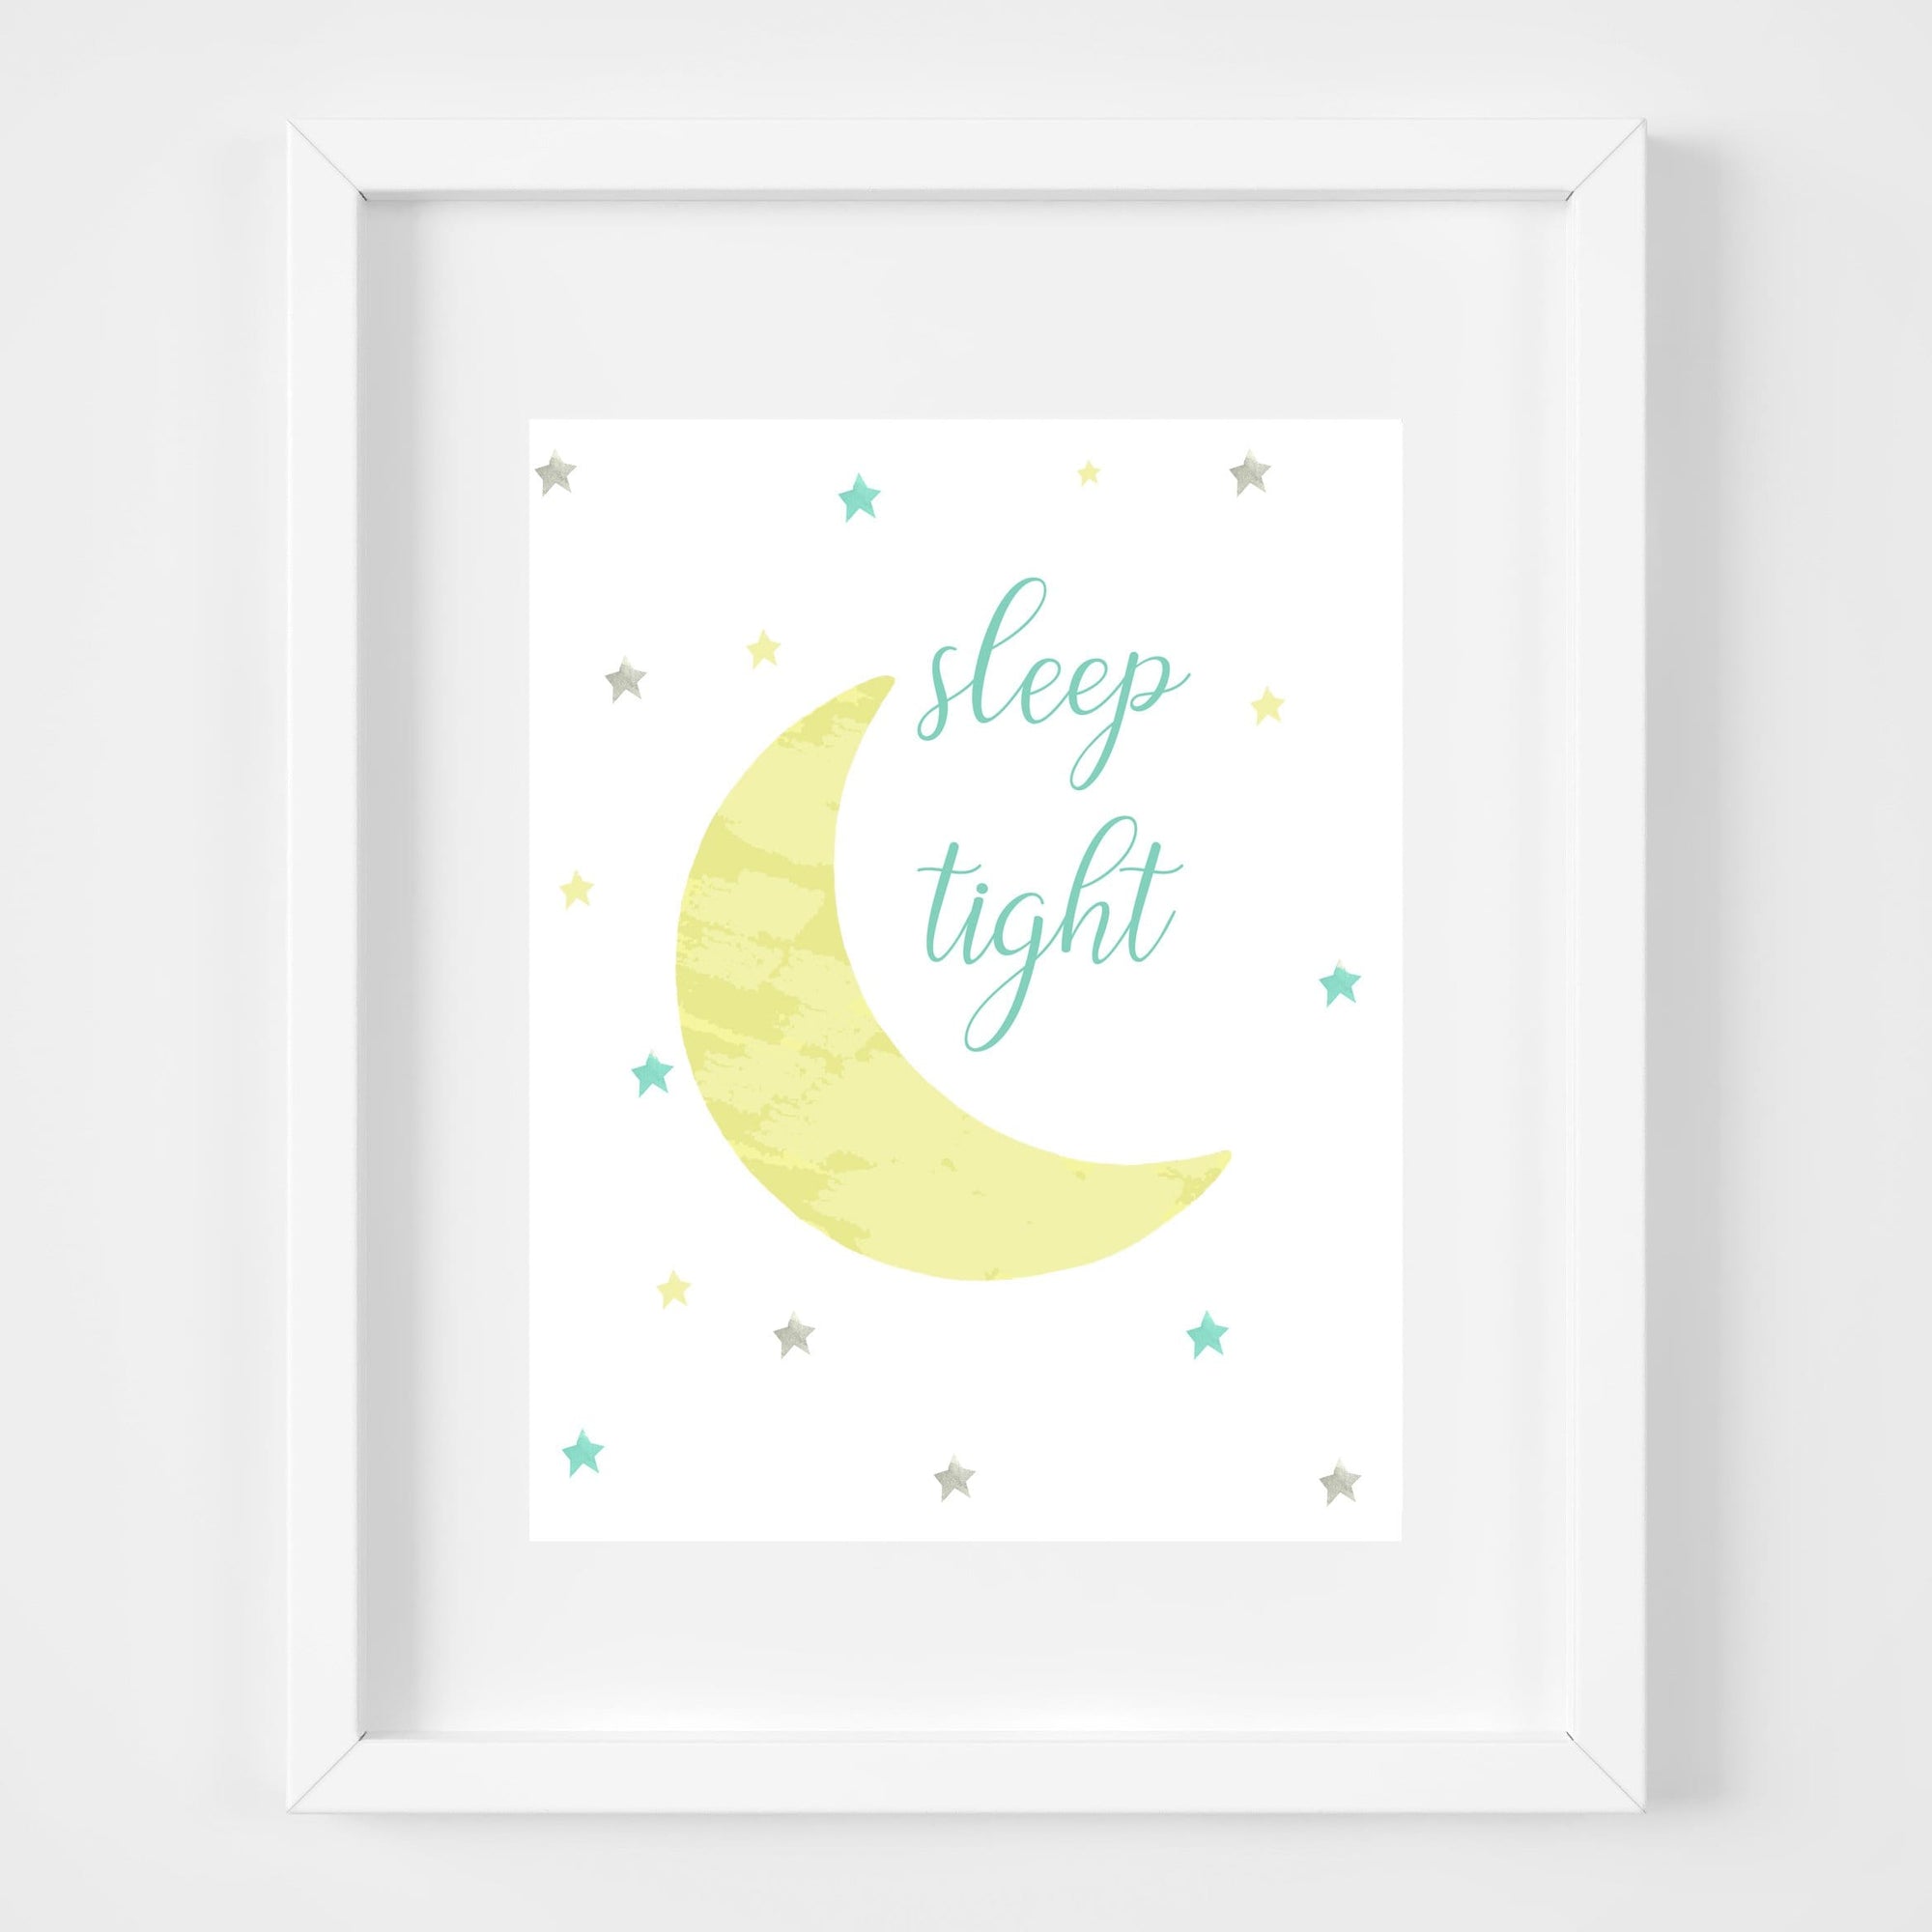 bebemoss.com Sleep tight print - Special offer handmade by moms  gifts with purpose